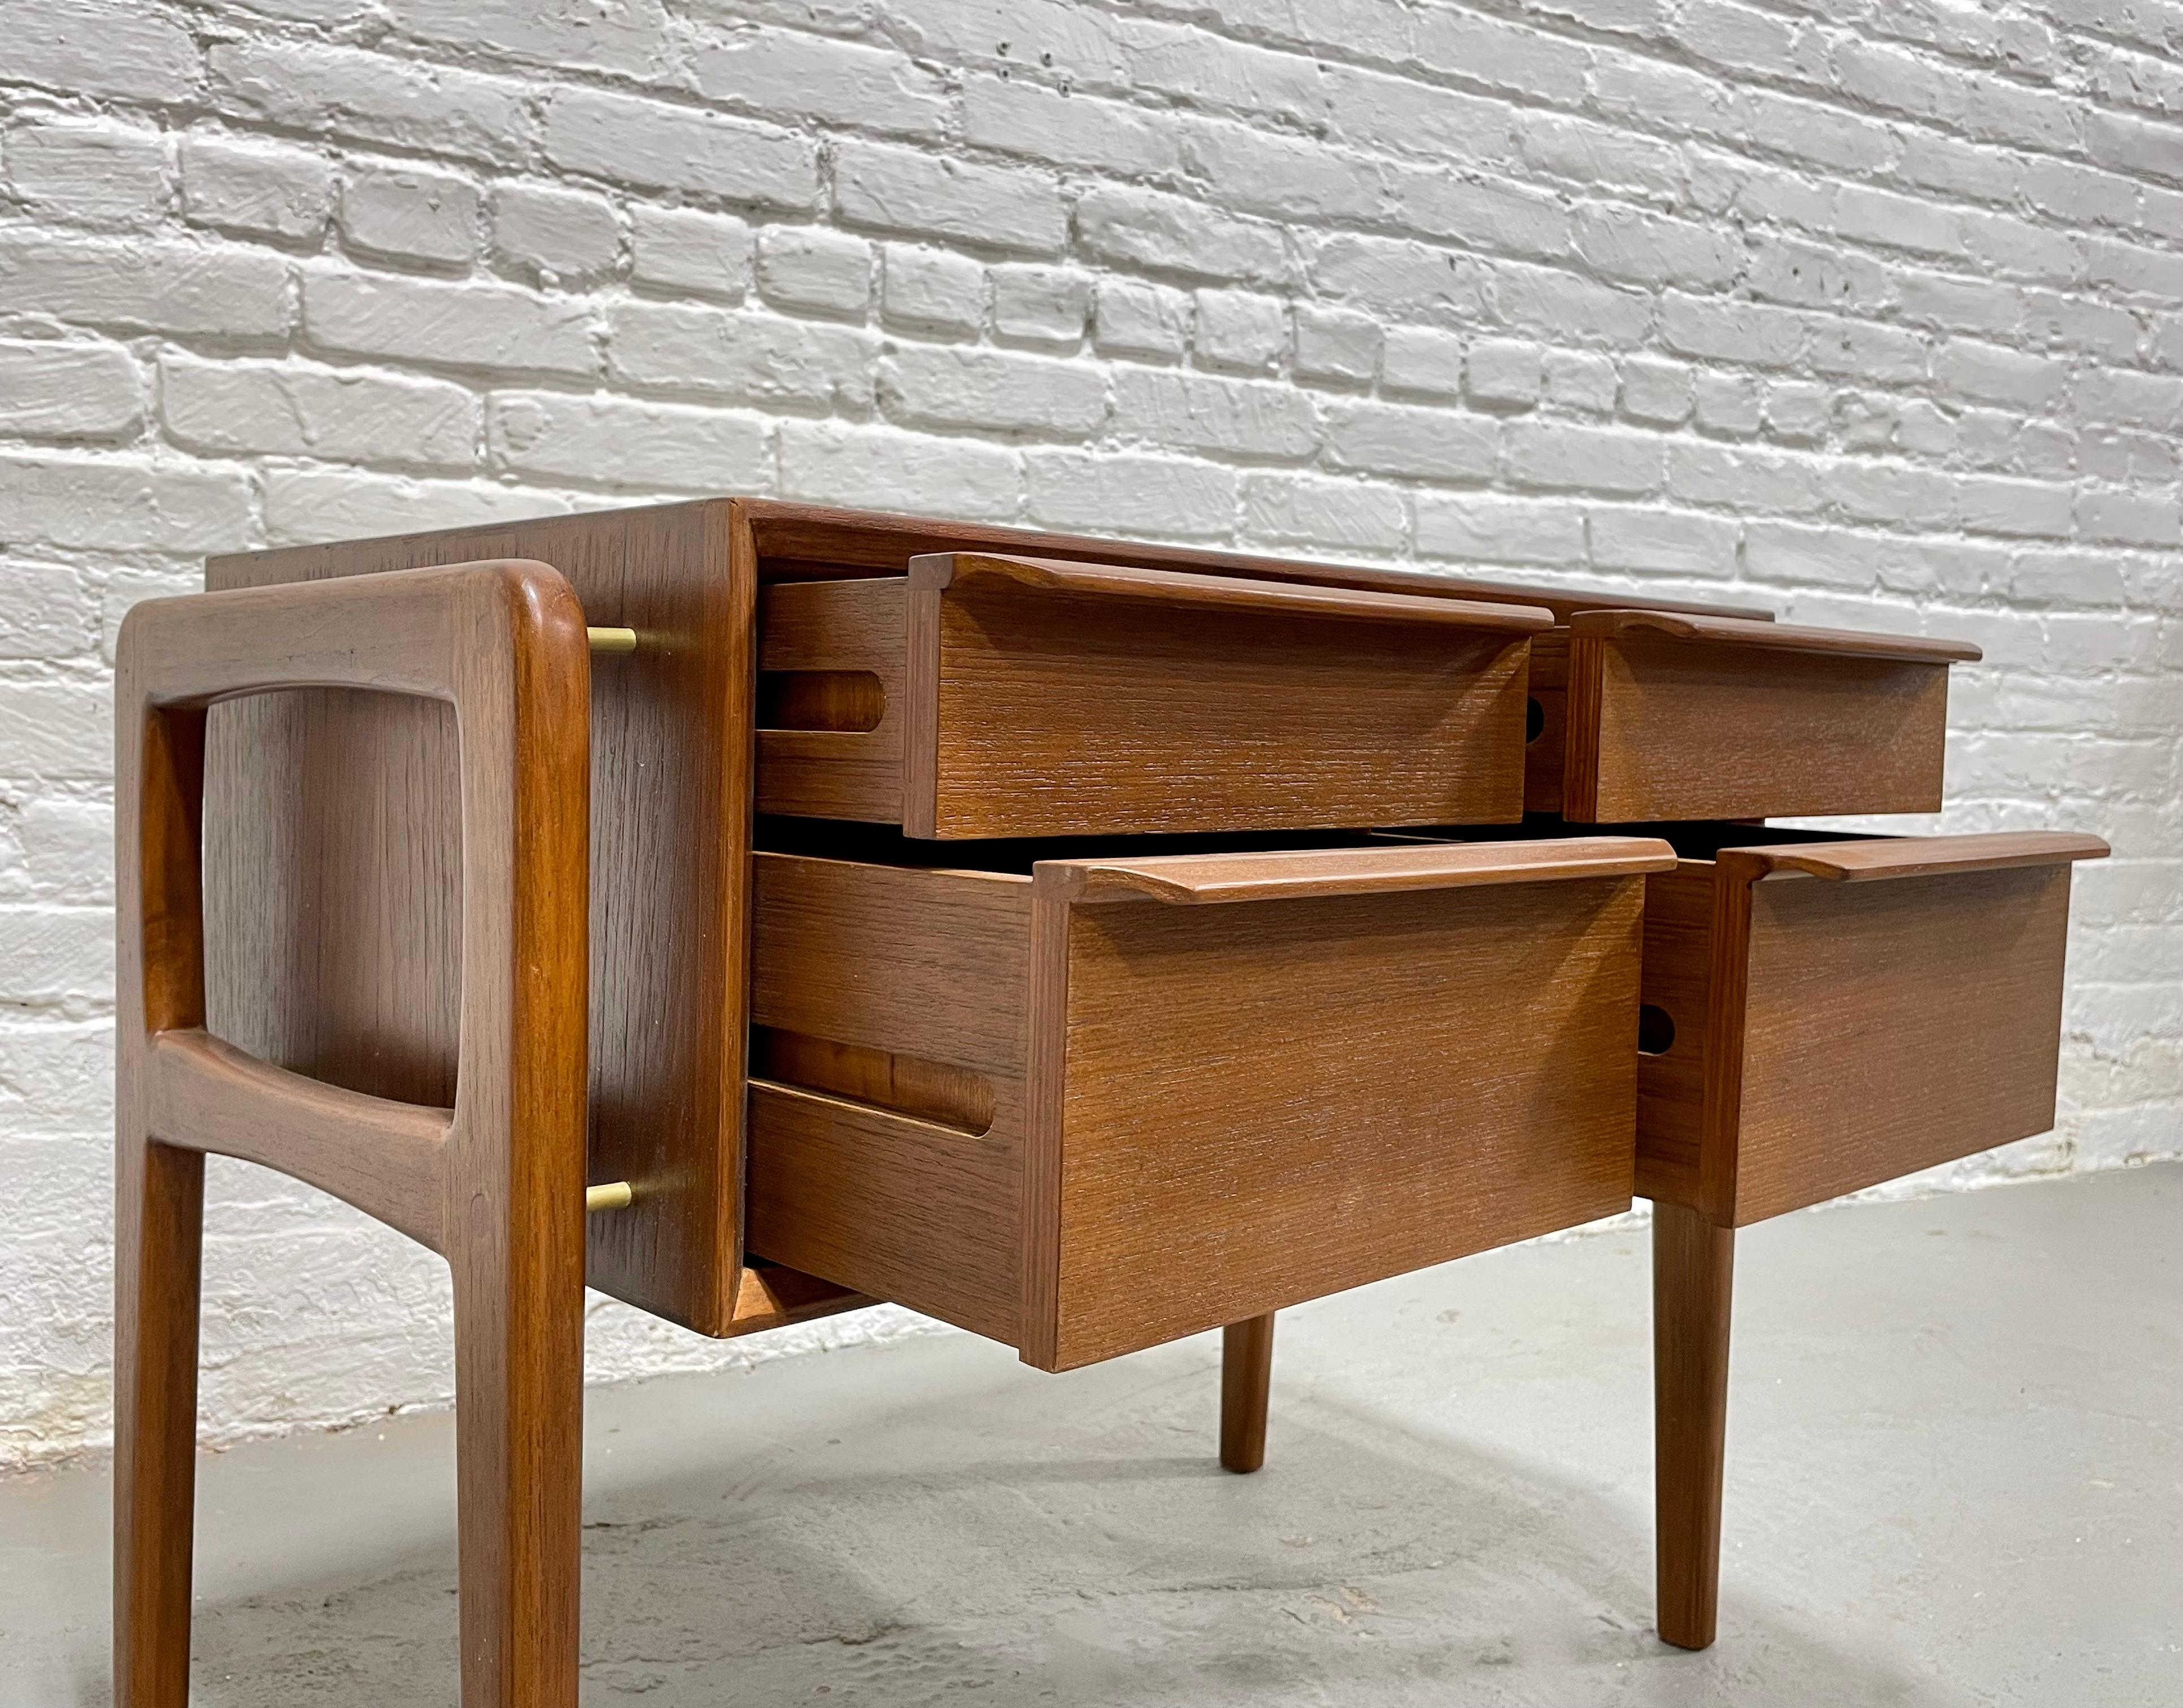 Contemporary Mid-Century Modern Styled Handmade Teak Cabinet / Entryway Table For Sale